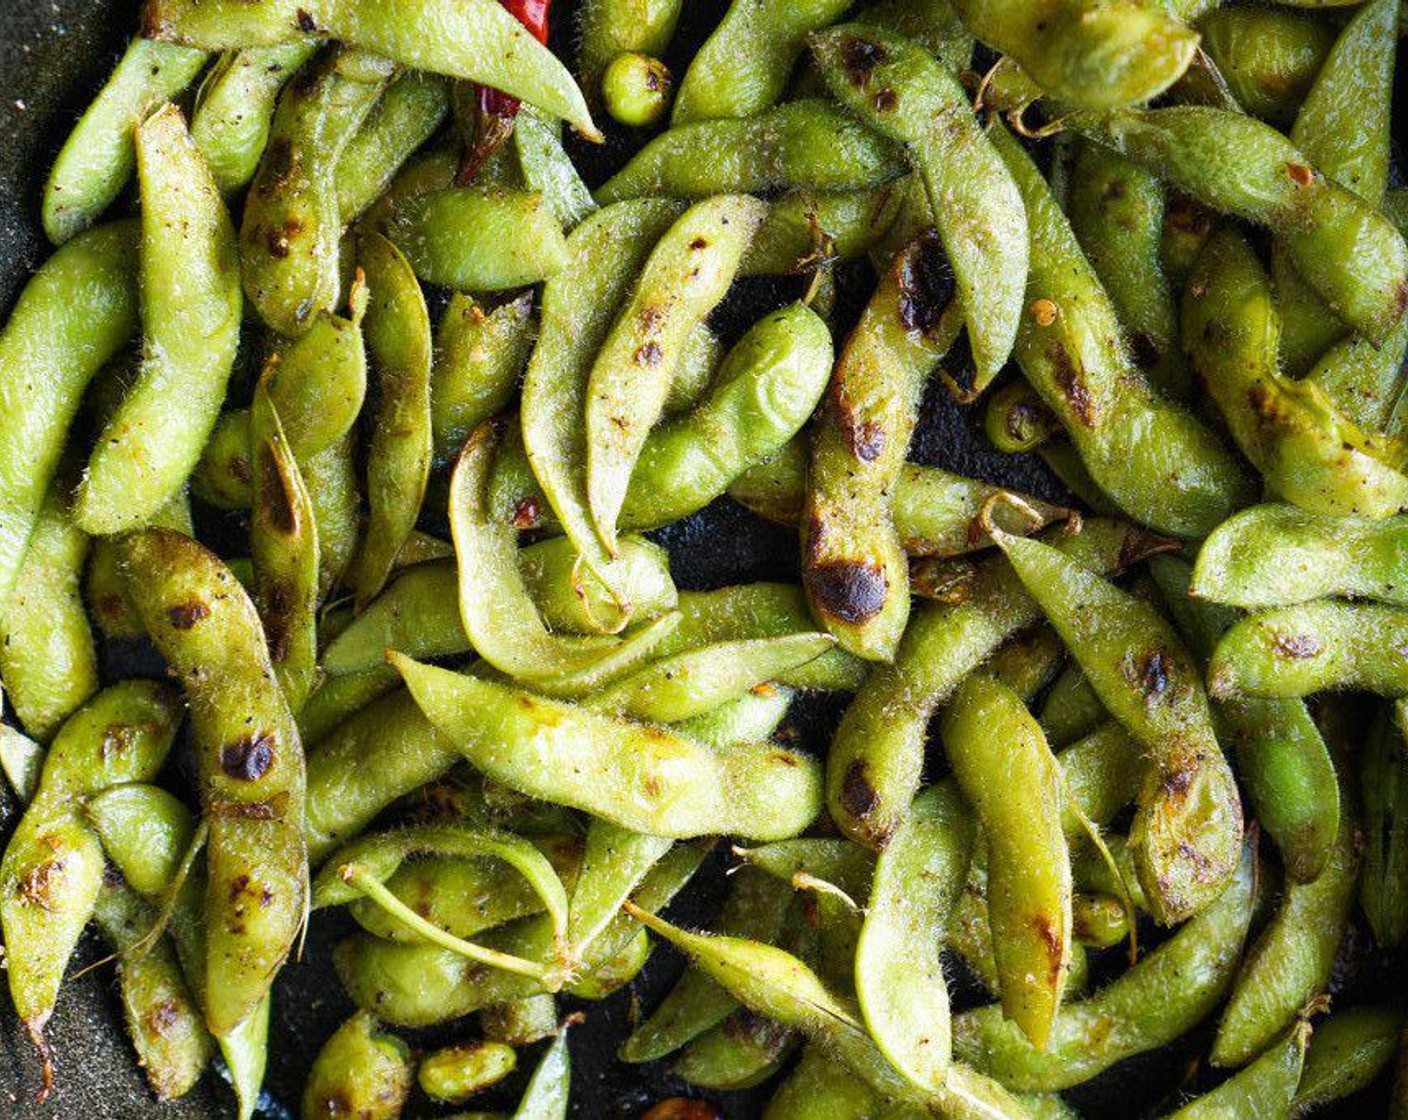 step 3 Add the Edamame (5 2/3 cups), toss to coat in oil and saute for 3-5 minutes, stirring frequently, until blistered. As the edamame cooks, season generously with Garlic Salt (to taste). Taste frequently and adjust as needed.